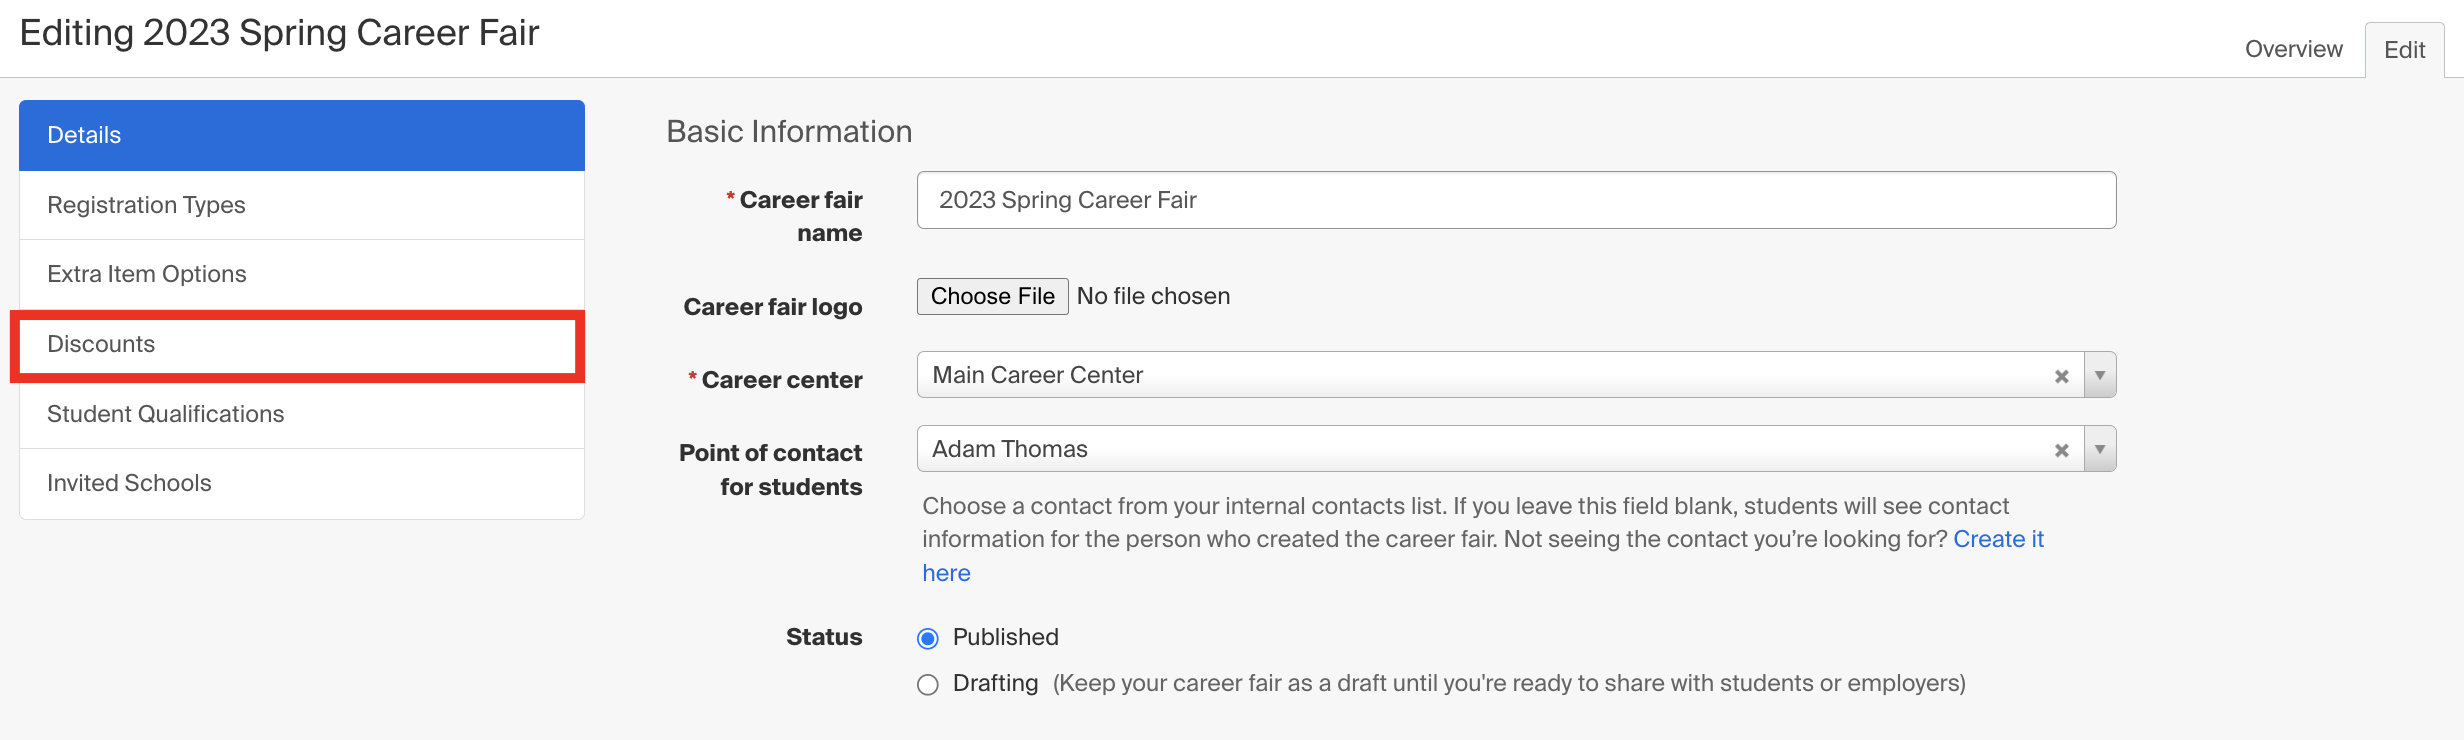 Discounts_button_on_Career_Fair_Edit_page.png